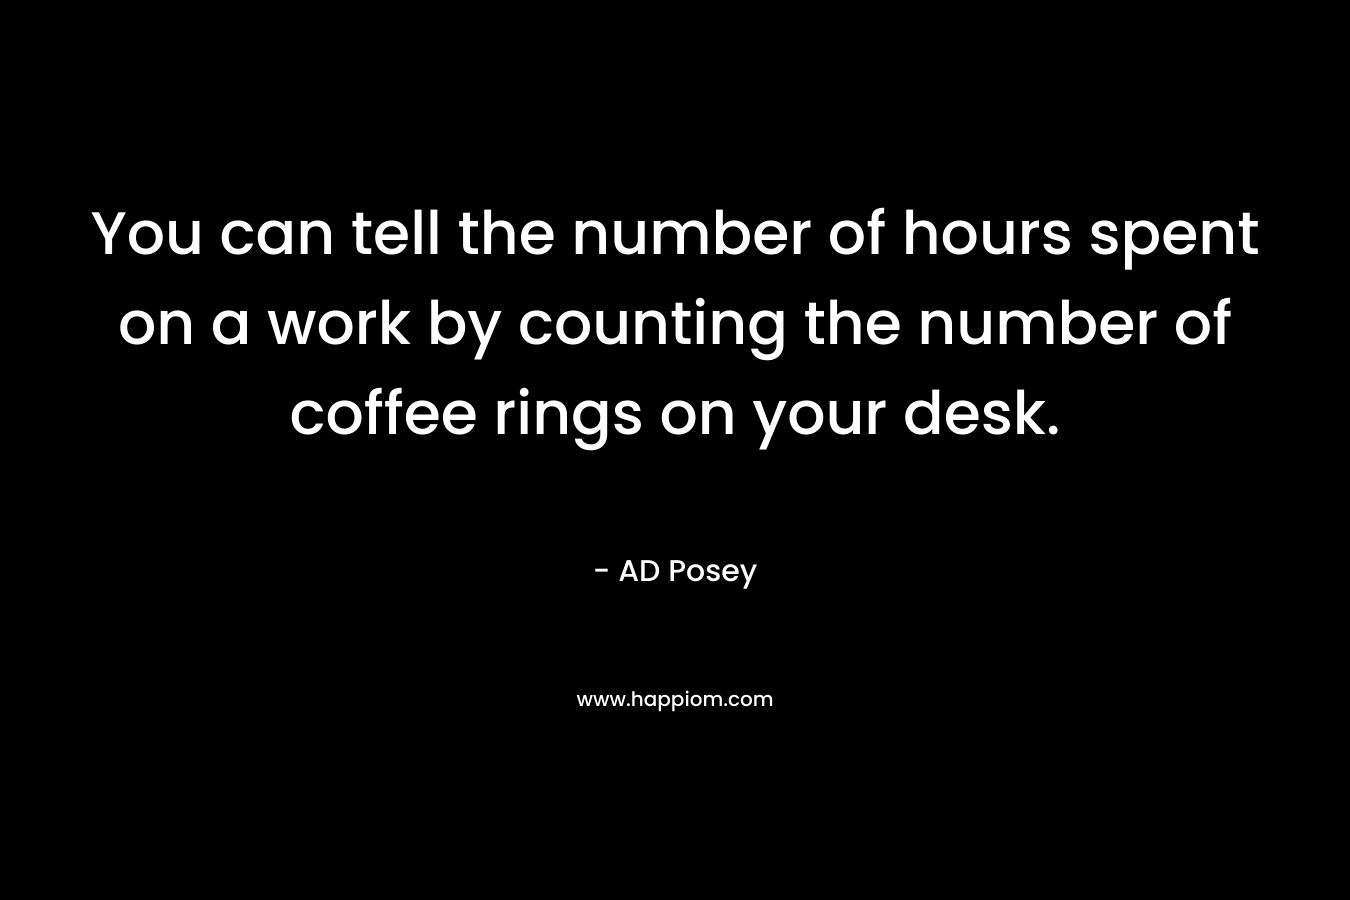 You can tell the number of hours spent on a work by counting the number of coffee rings on your desk. – AD Posey